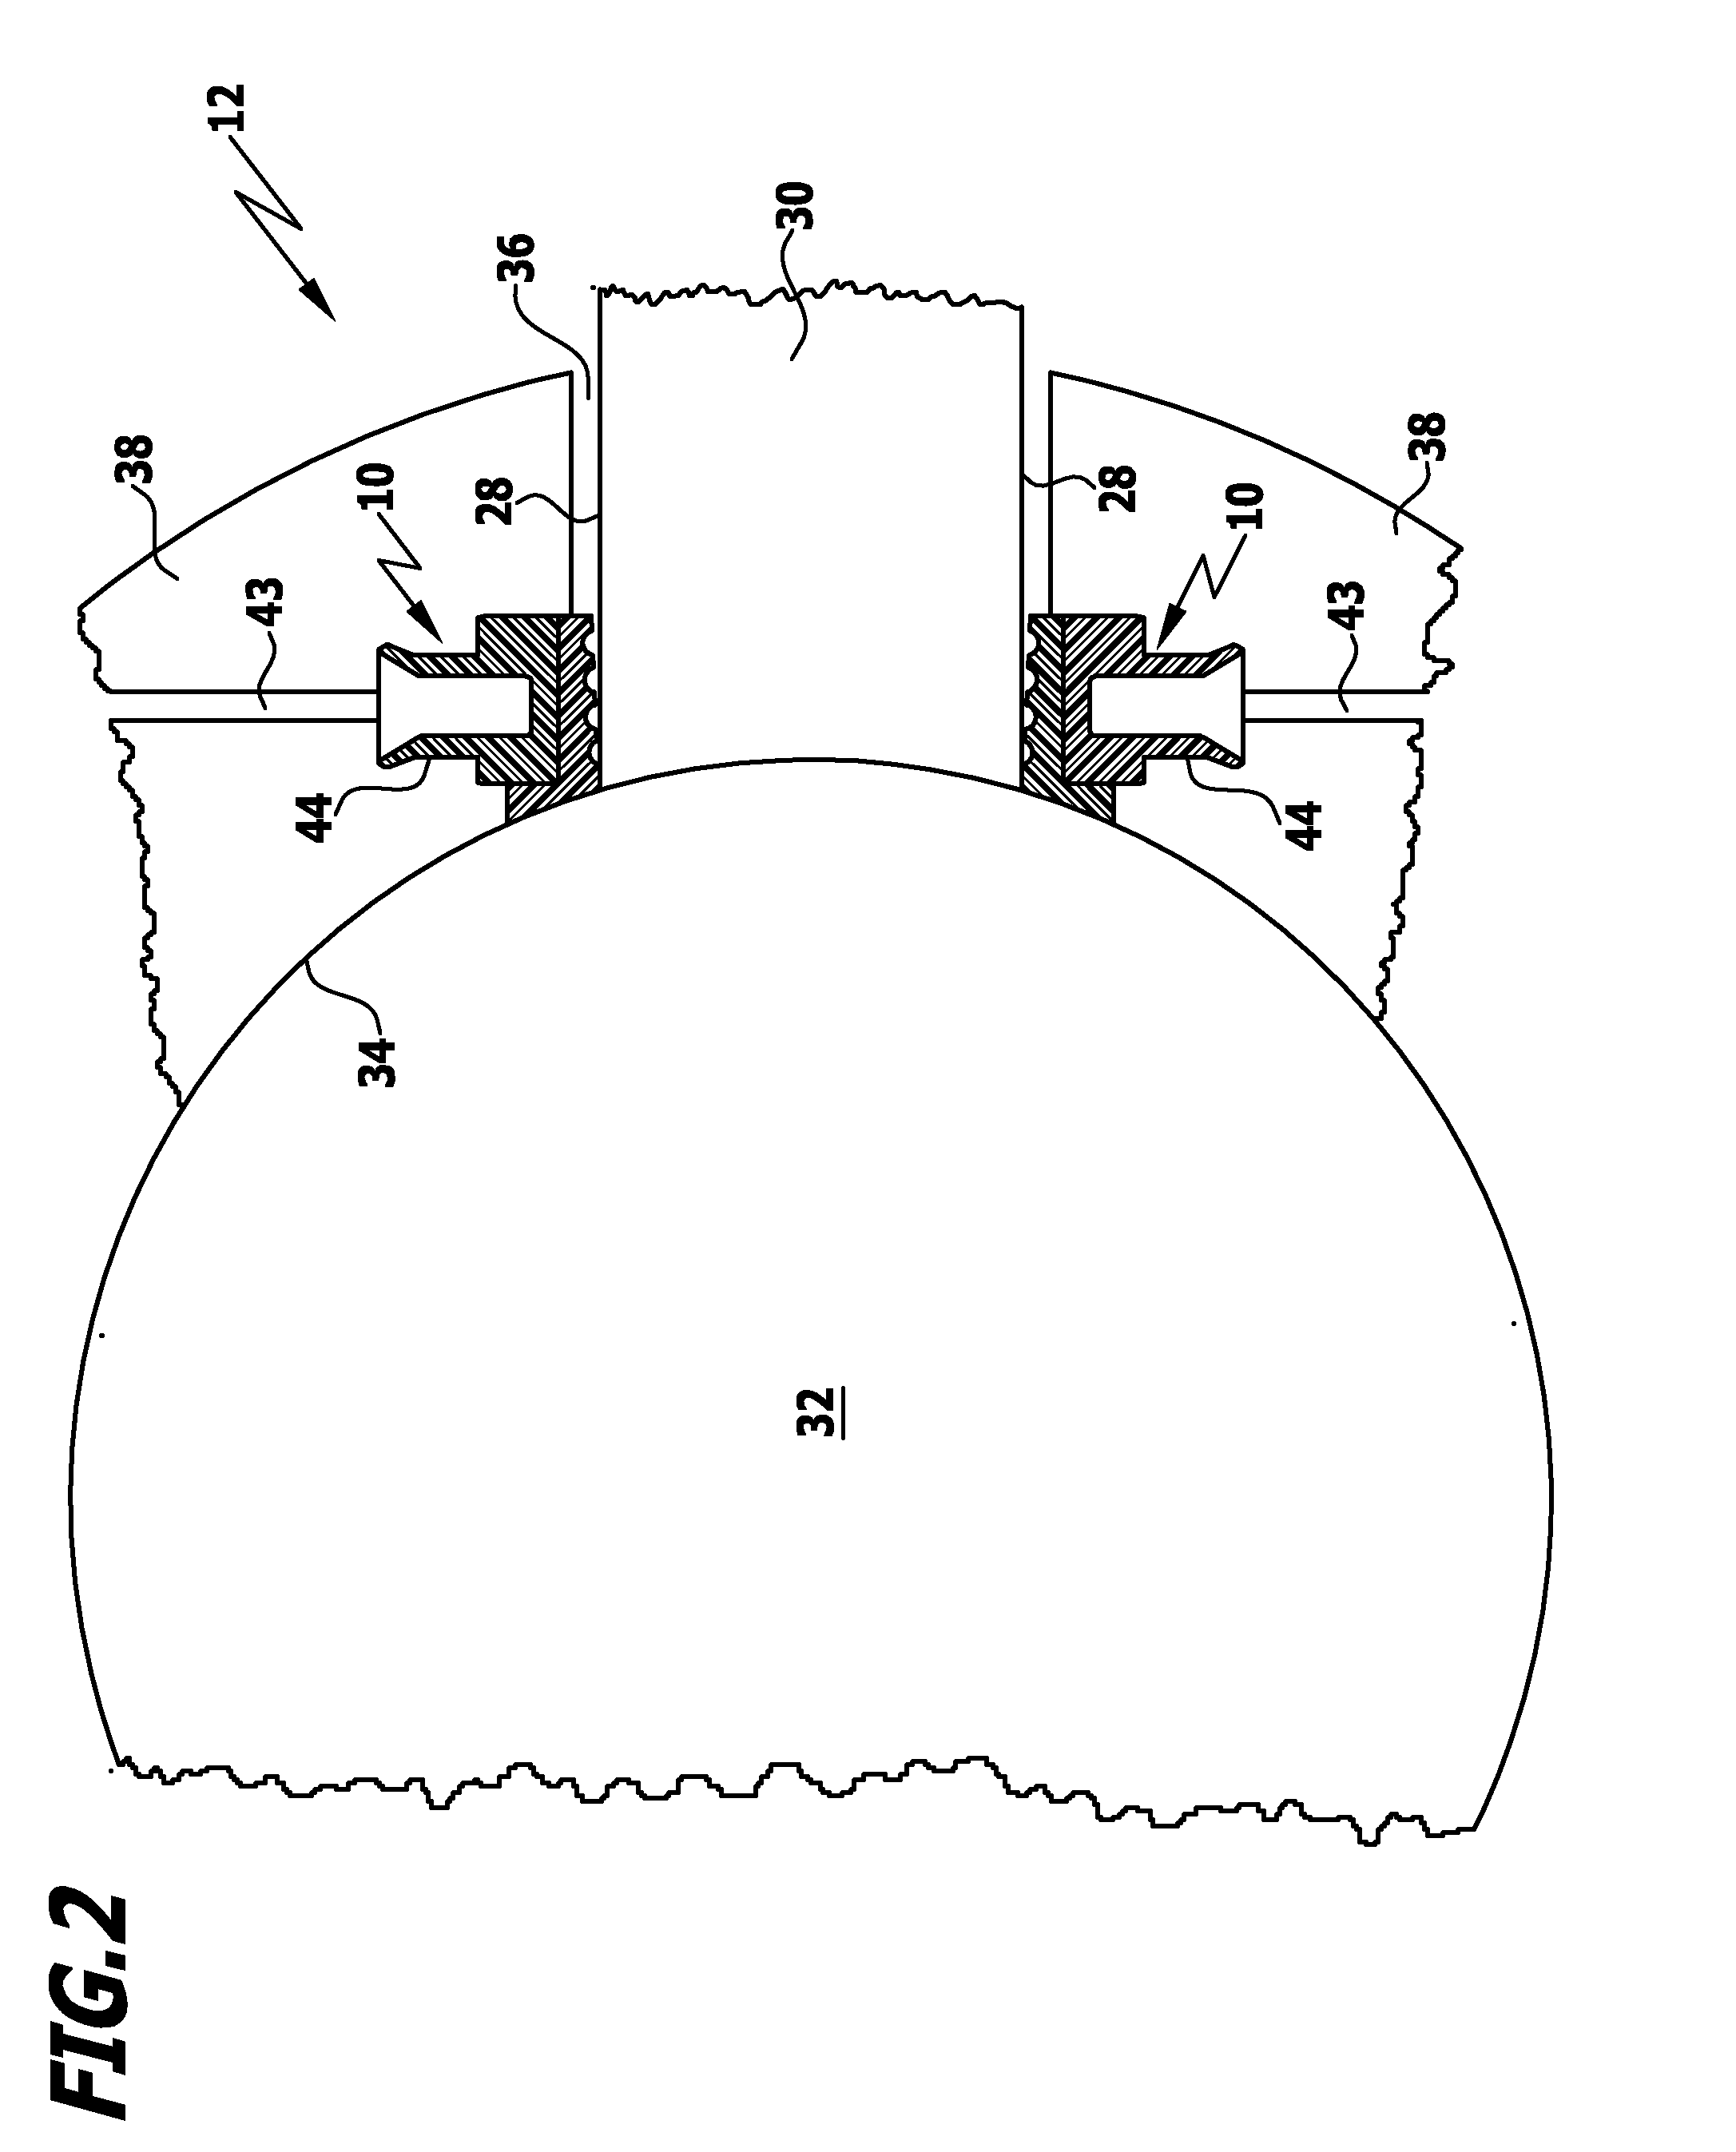 Sealing element for a rotary piston machine